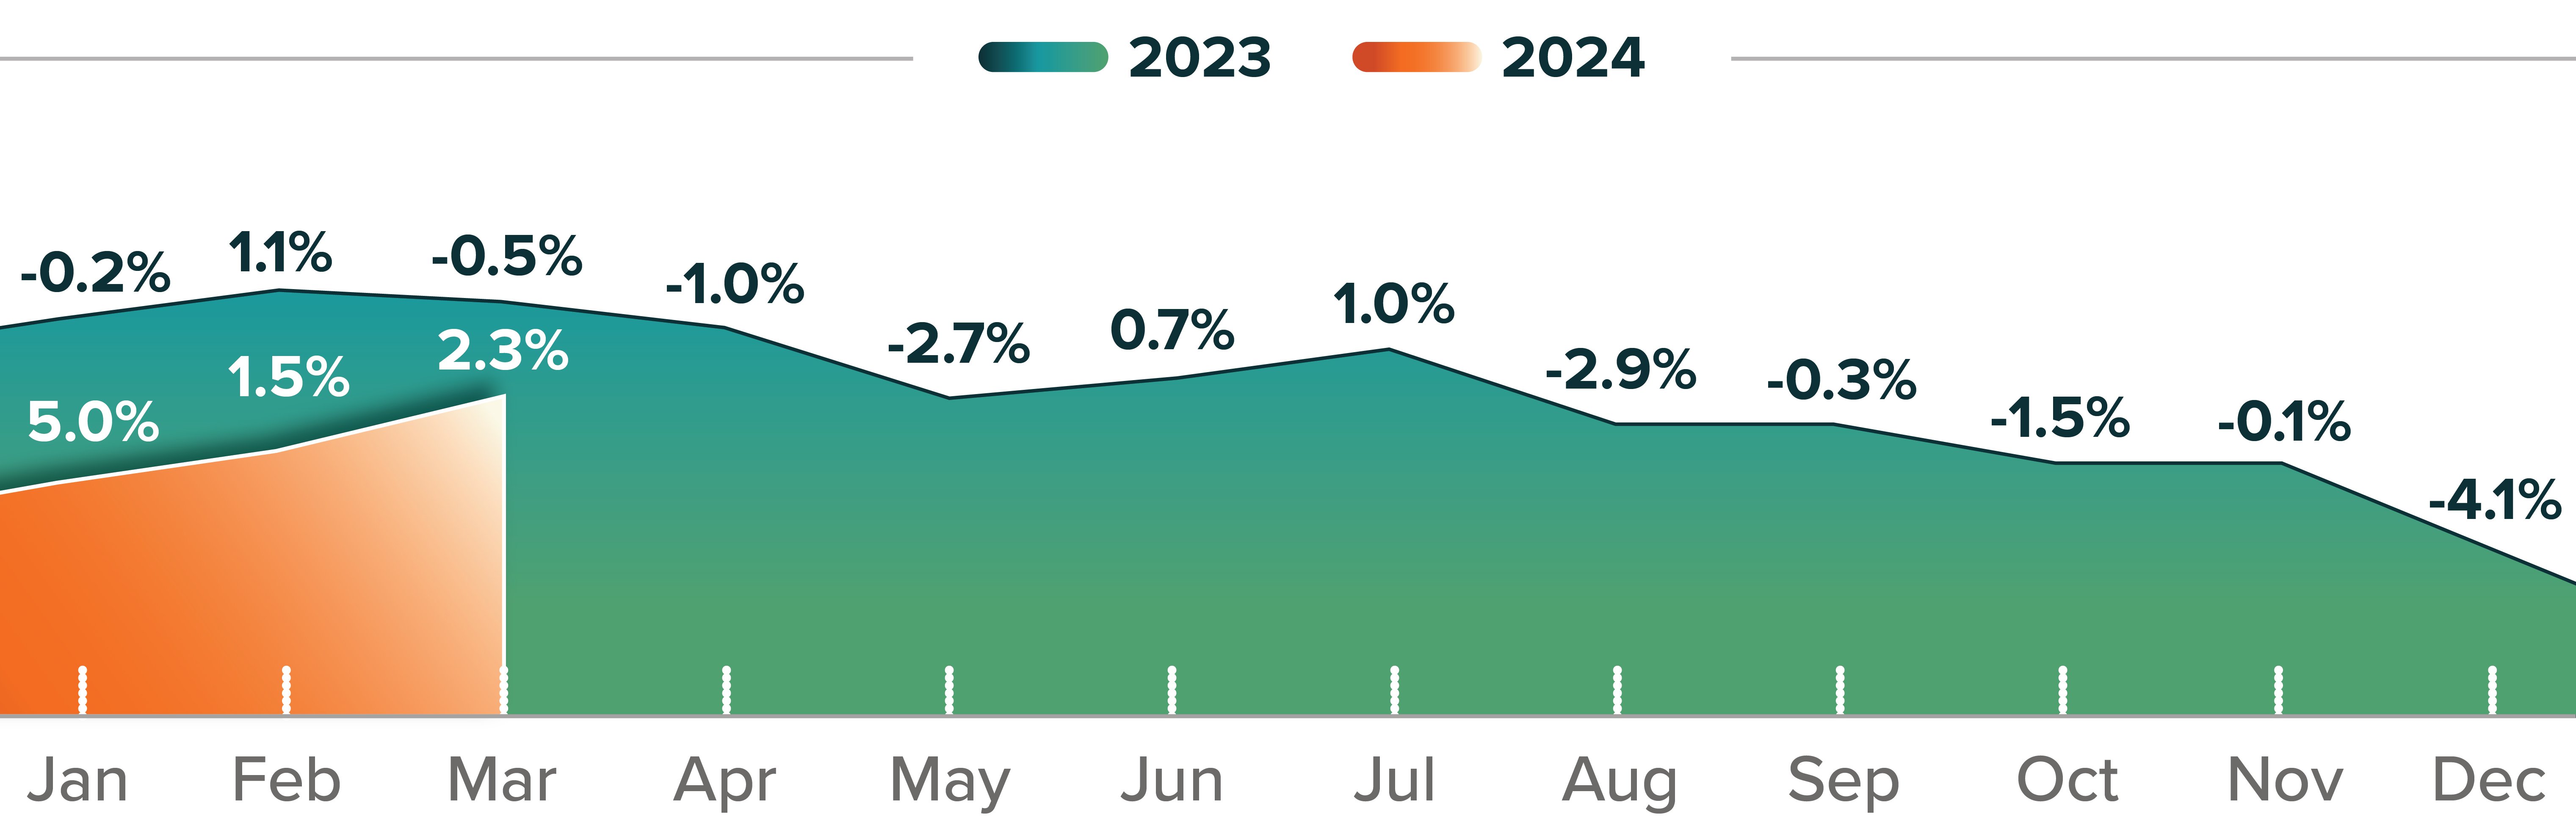 JM&A Group Automotive trends report 2023 year-end front PVR 2019 & 2023 chart